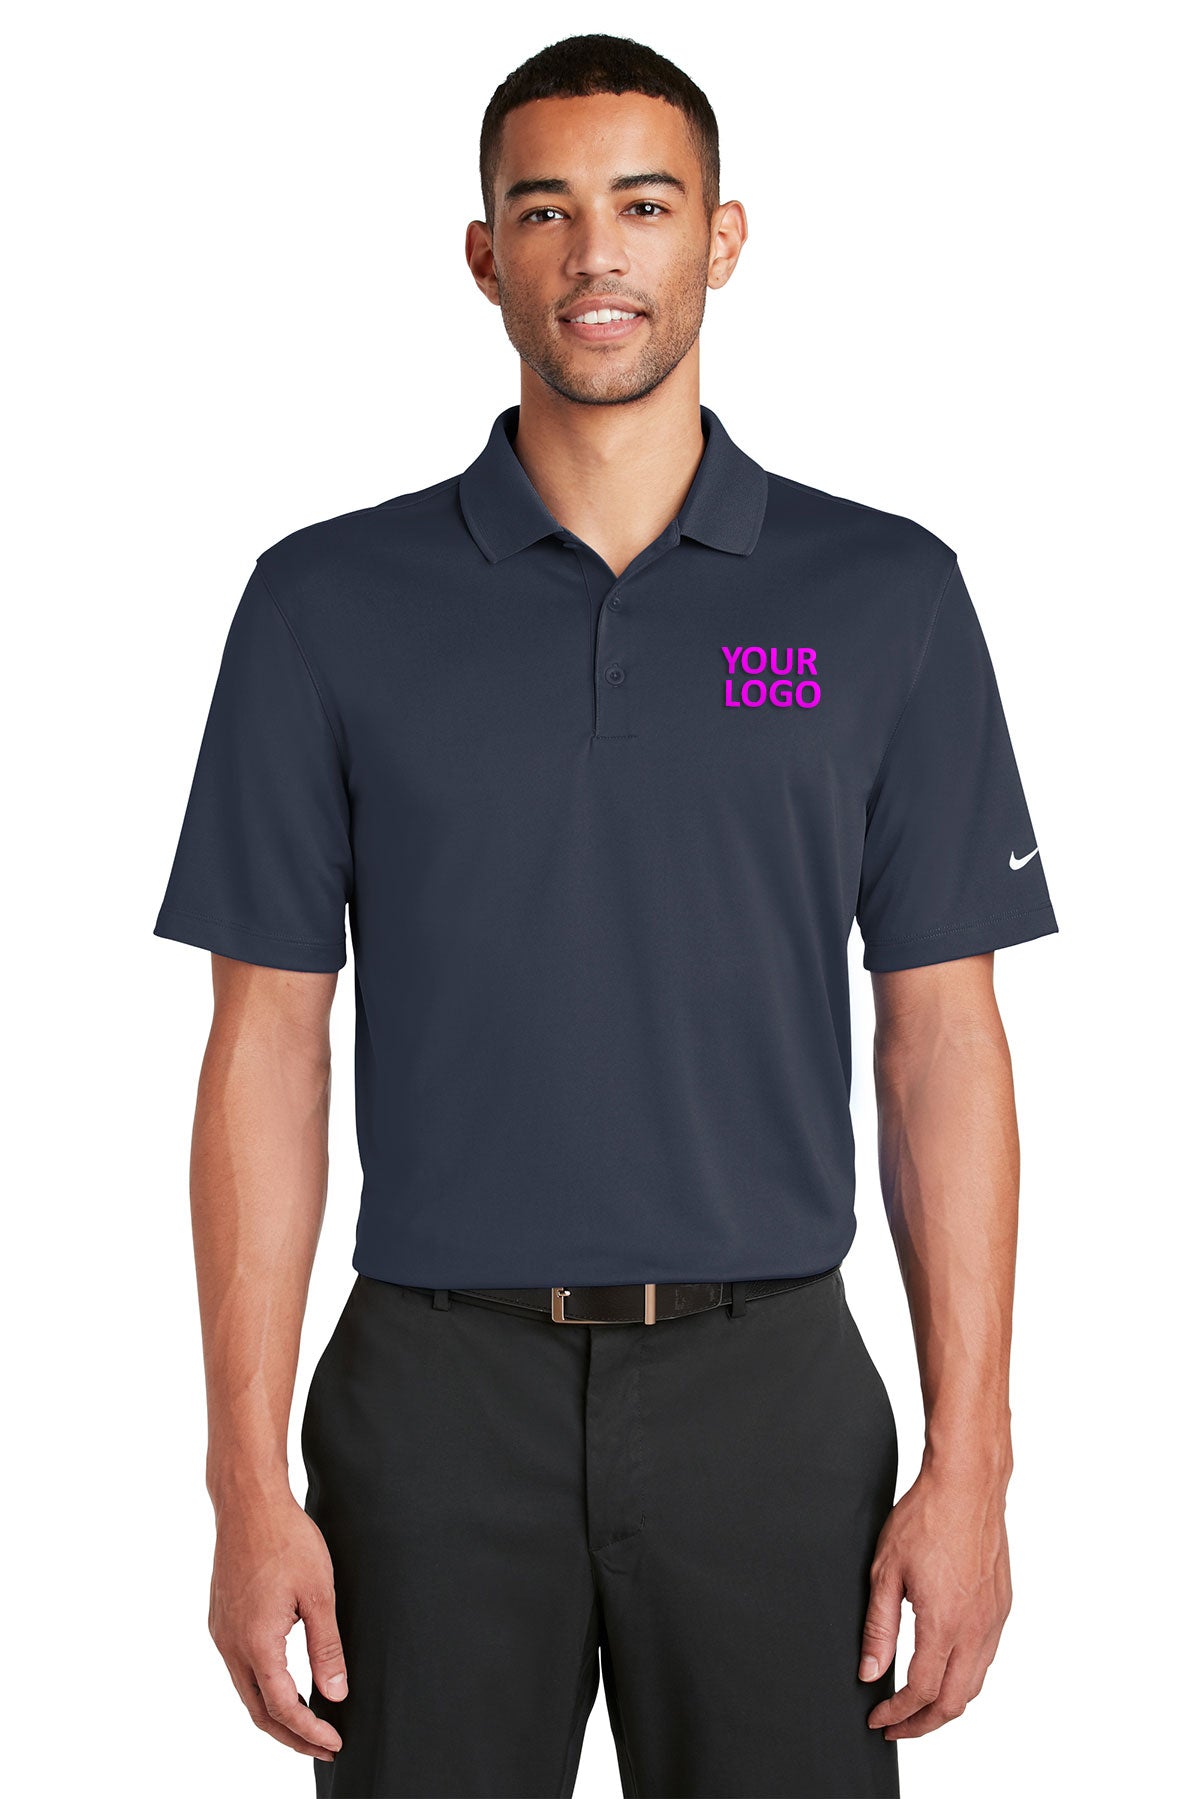 Nike Dri-FIT Players Custom Polos with Flat Knit Collar, Navy